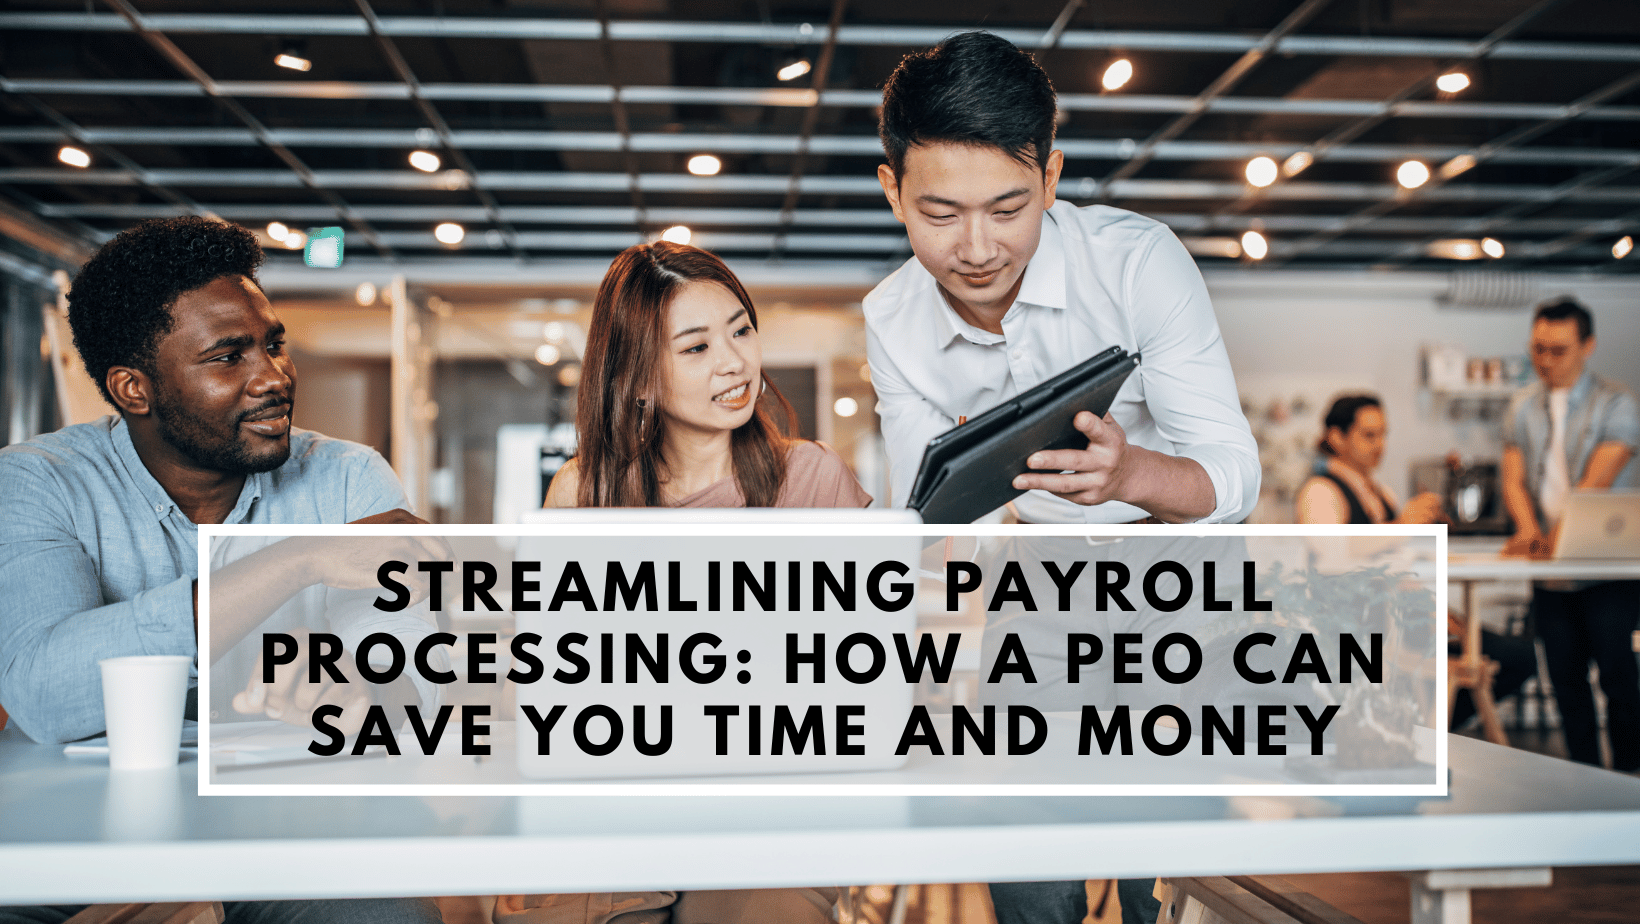 Streamlining Payroll Processing: How a PEO Can Save You Time and Money